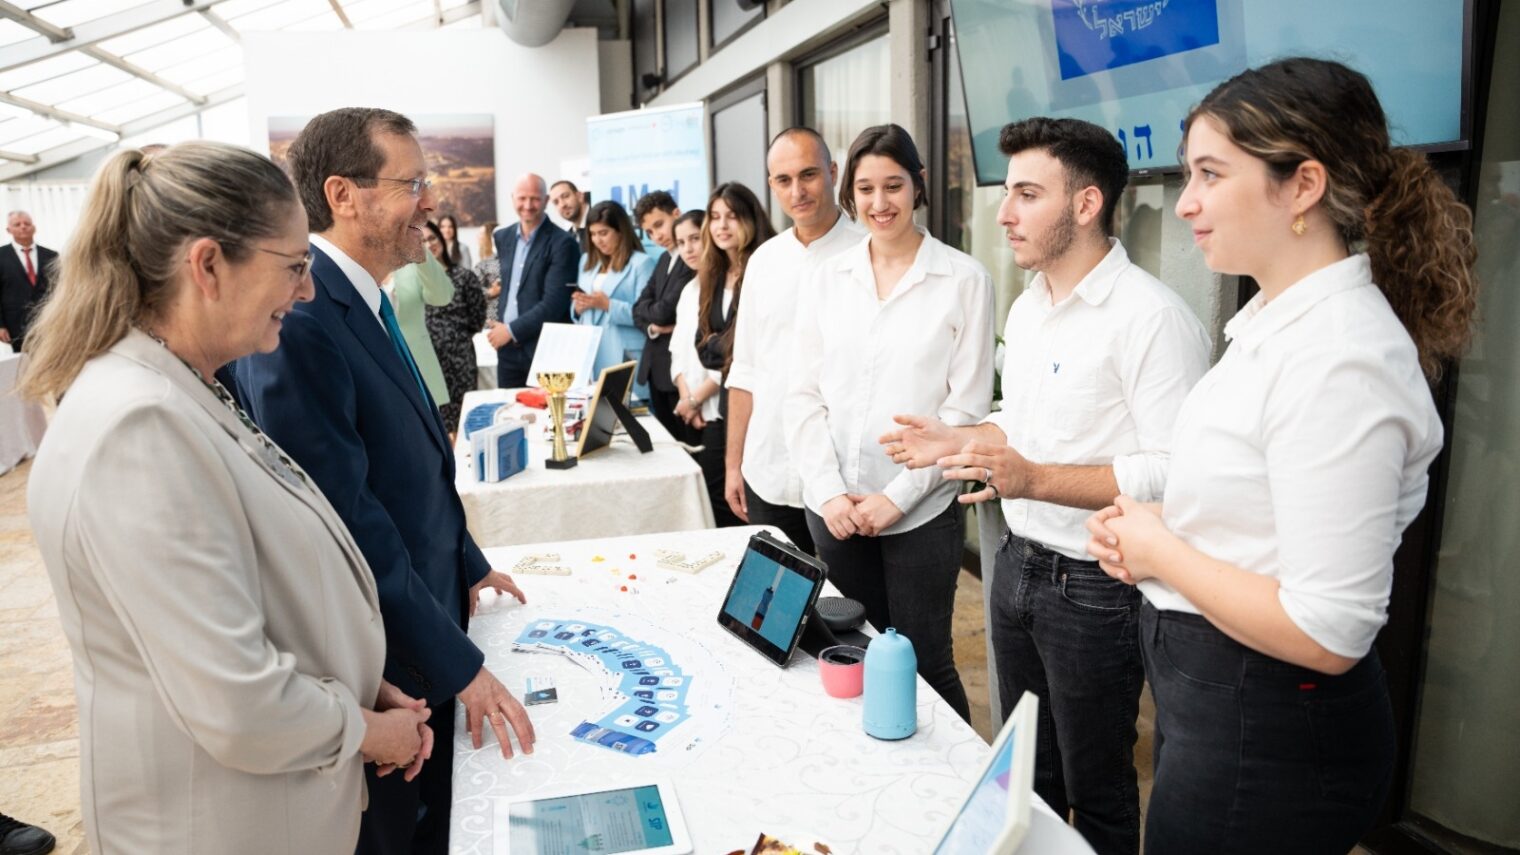 Unistream students presenting their startup idea to Israeli President Isaac Herzog and his wife, Michal. Photo courtesy of Unistream